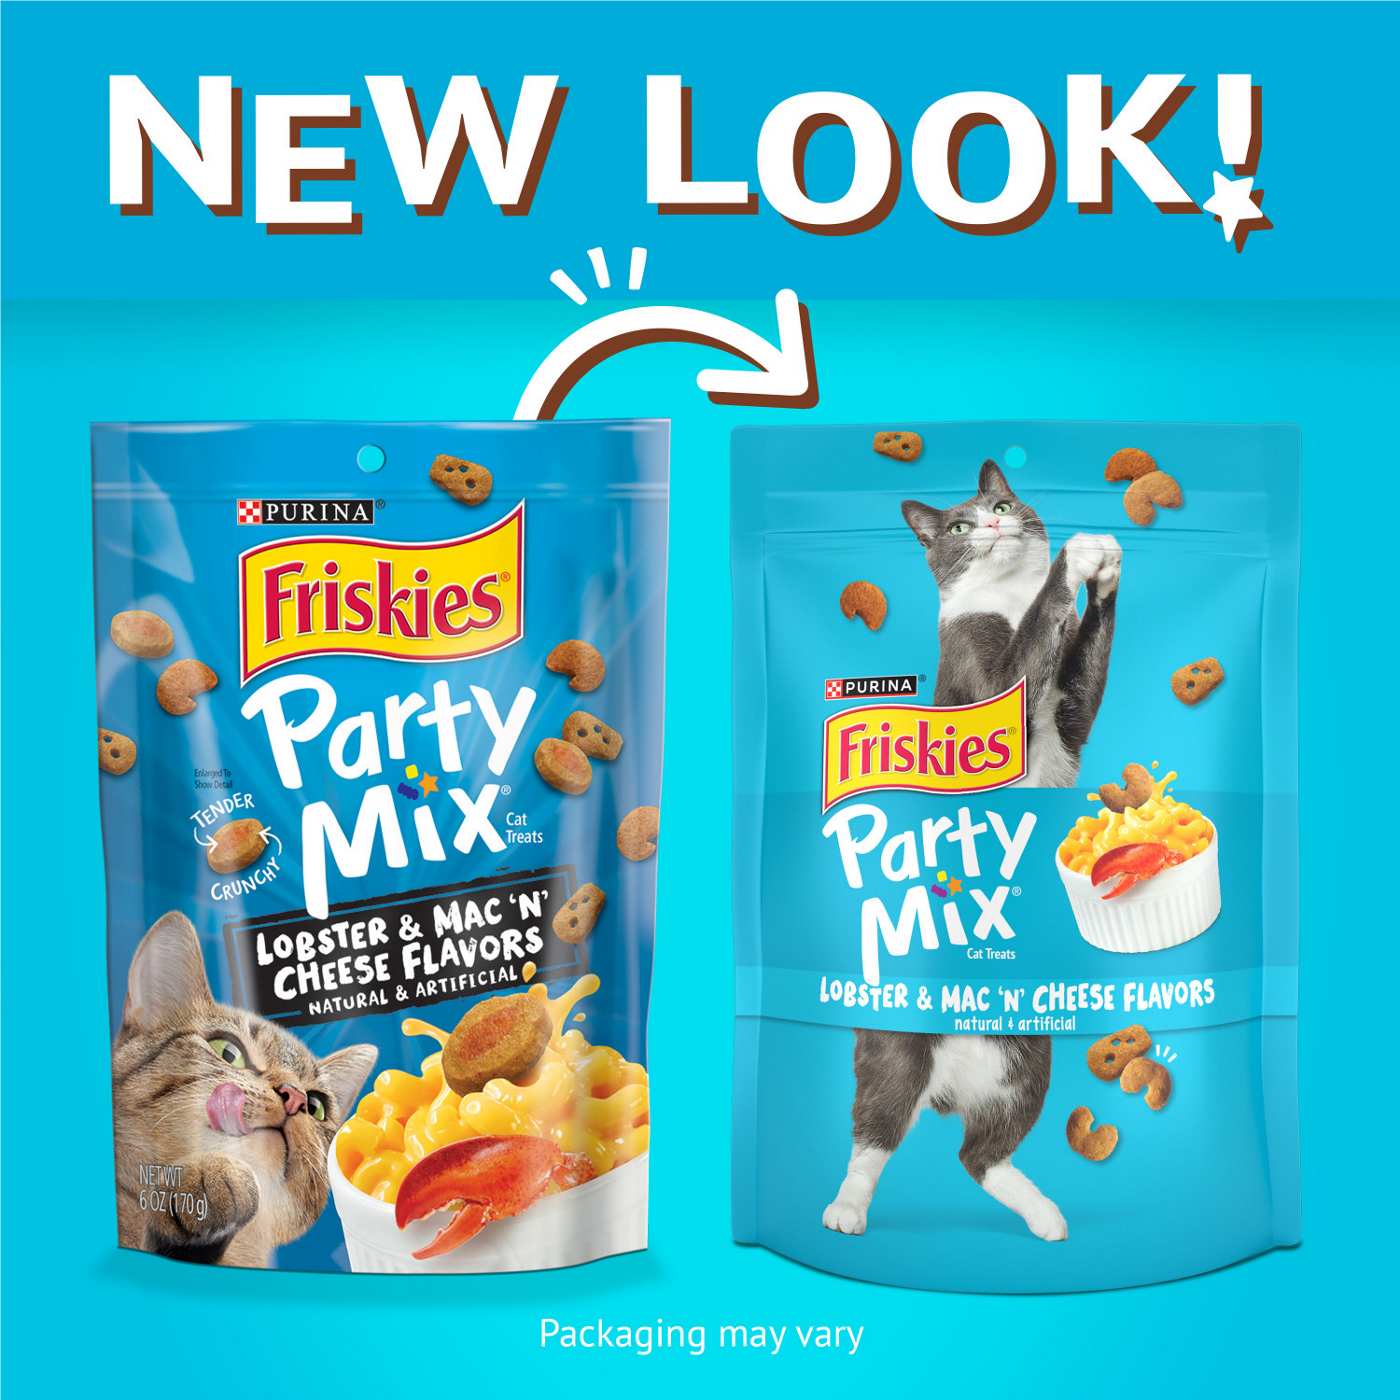 Friskies Purina Friskies Made in USA Facilities Cat Treats, Party Mix Lobster & Mac 'N' Cheese Flavors; image 9 of 10